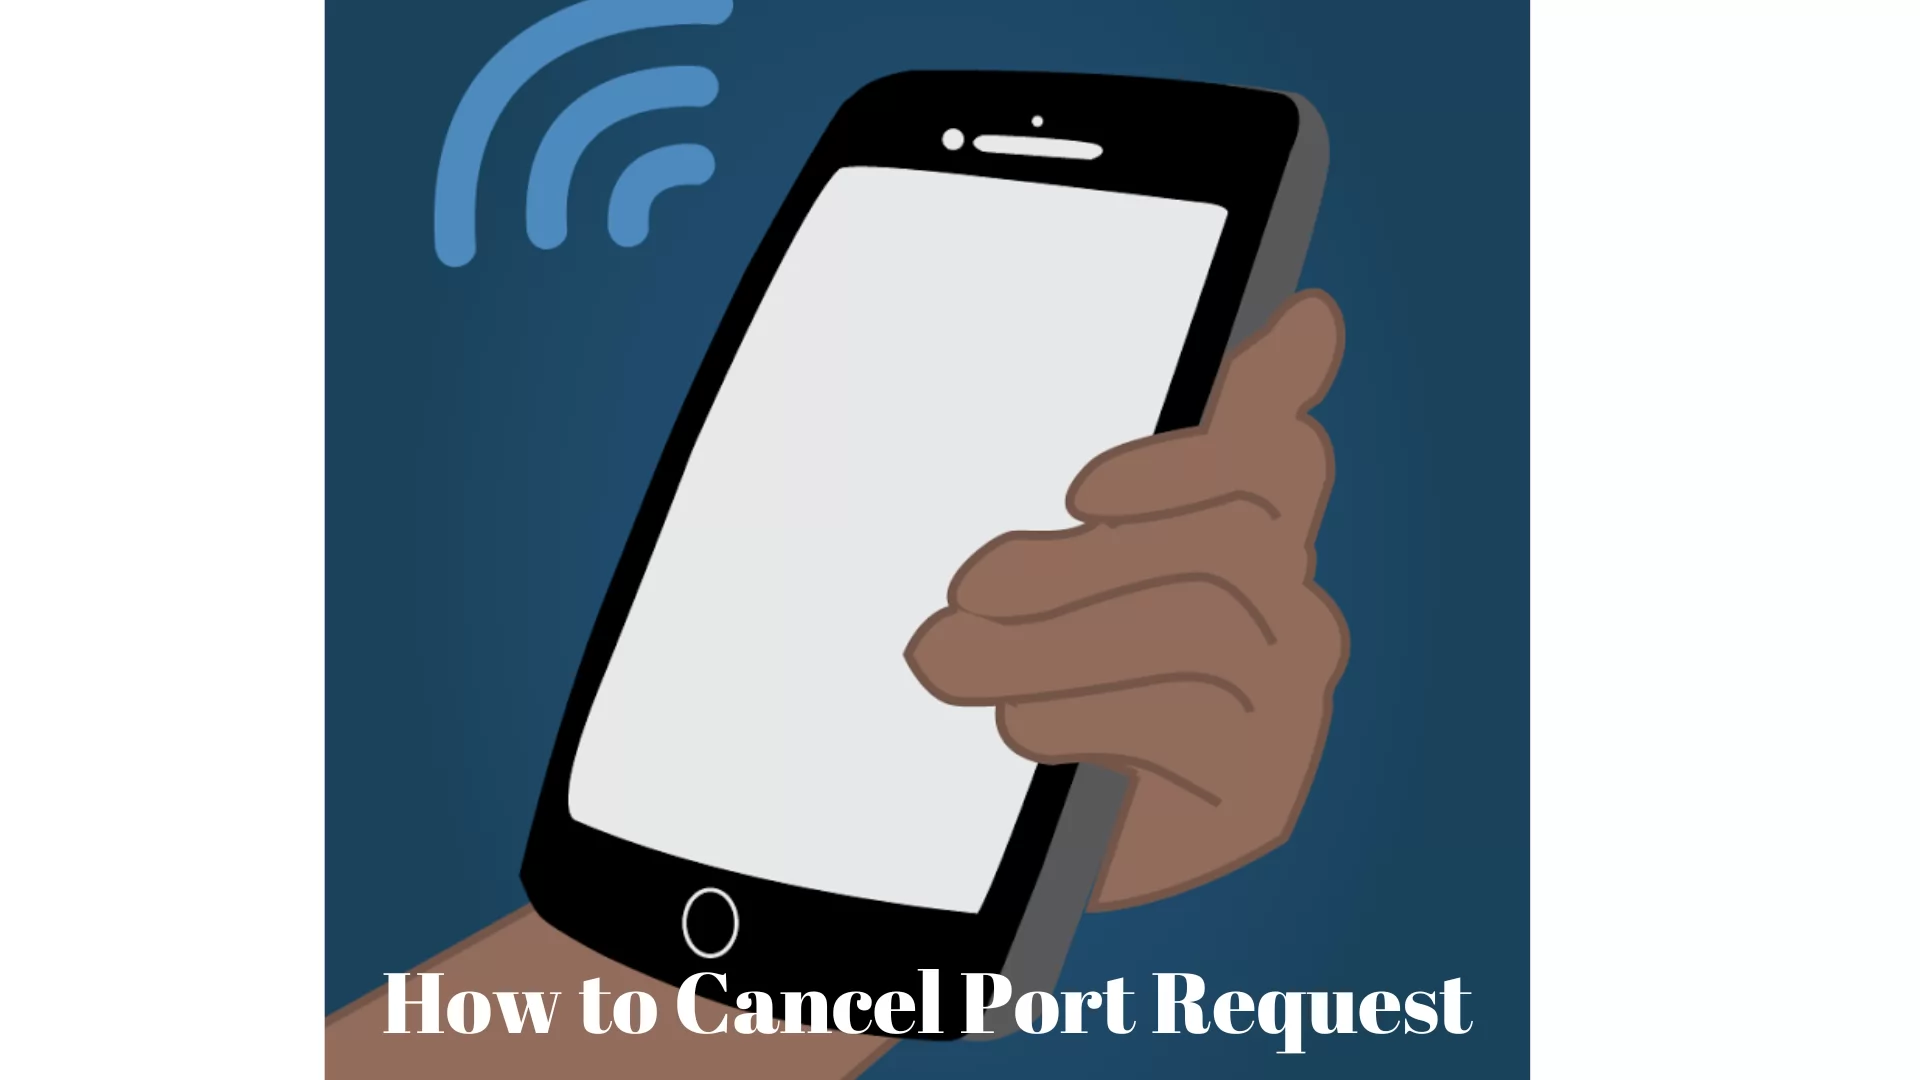 How to Cancel Port Request